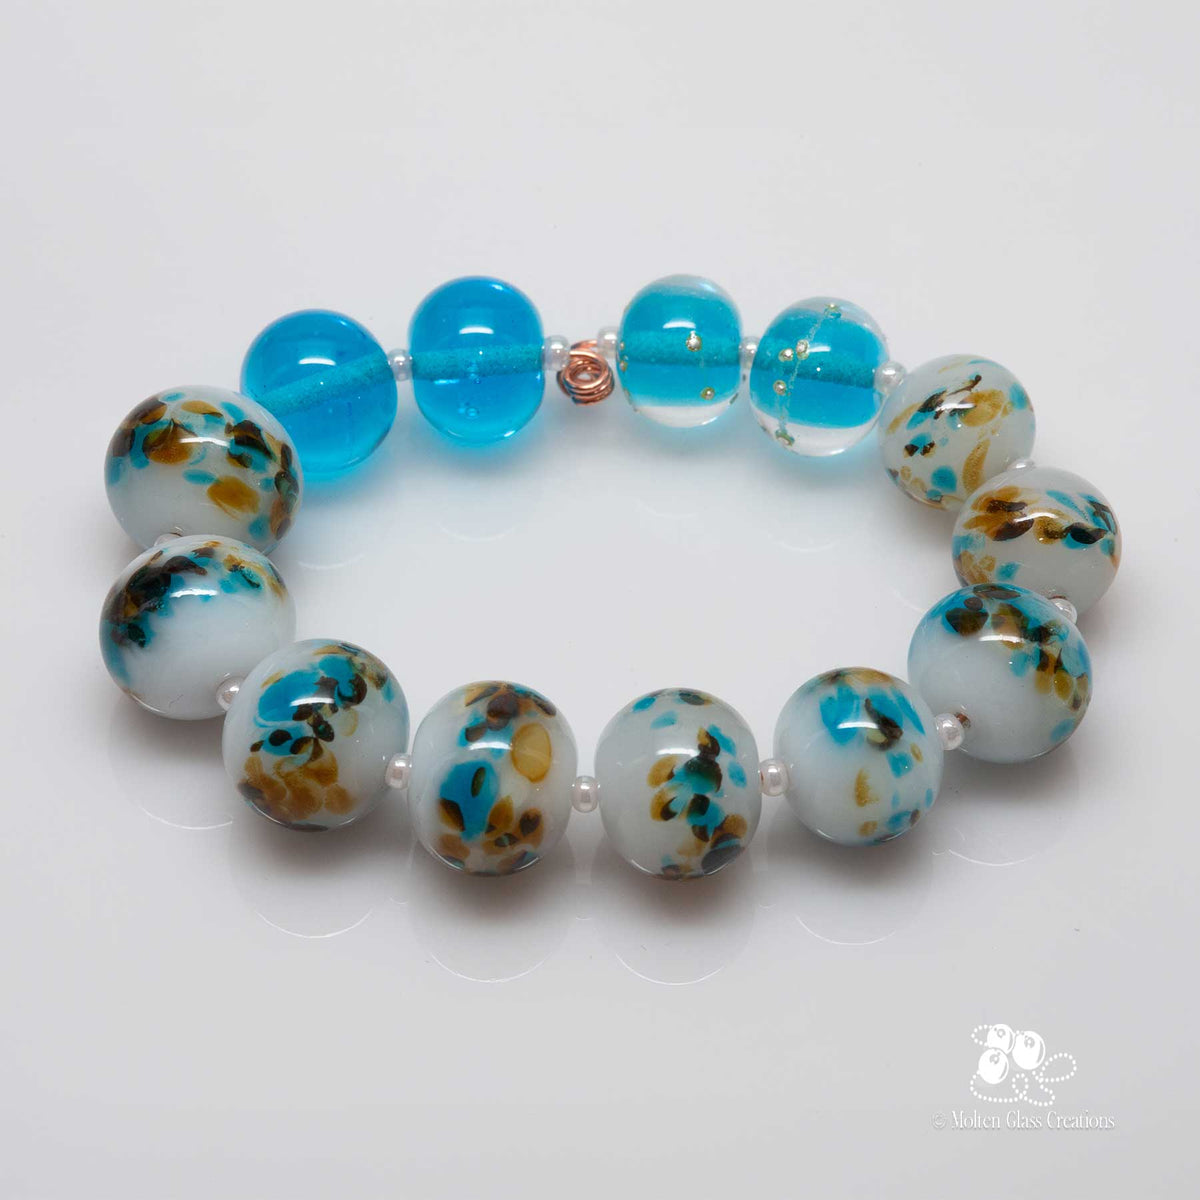 Bead set - Cloudy Day